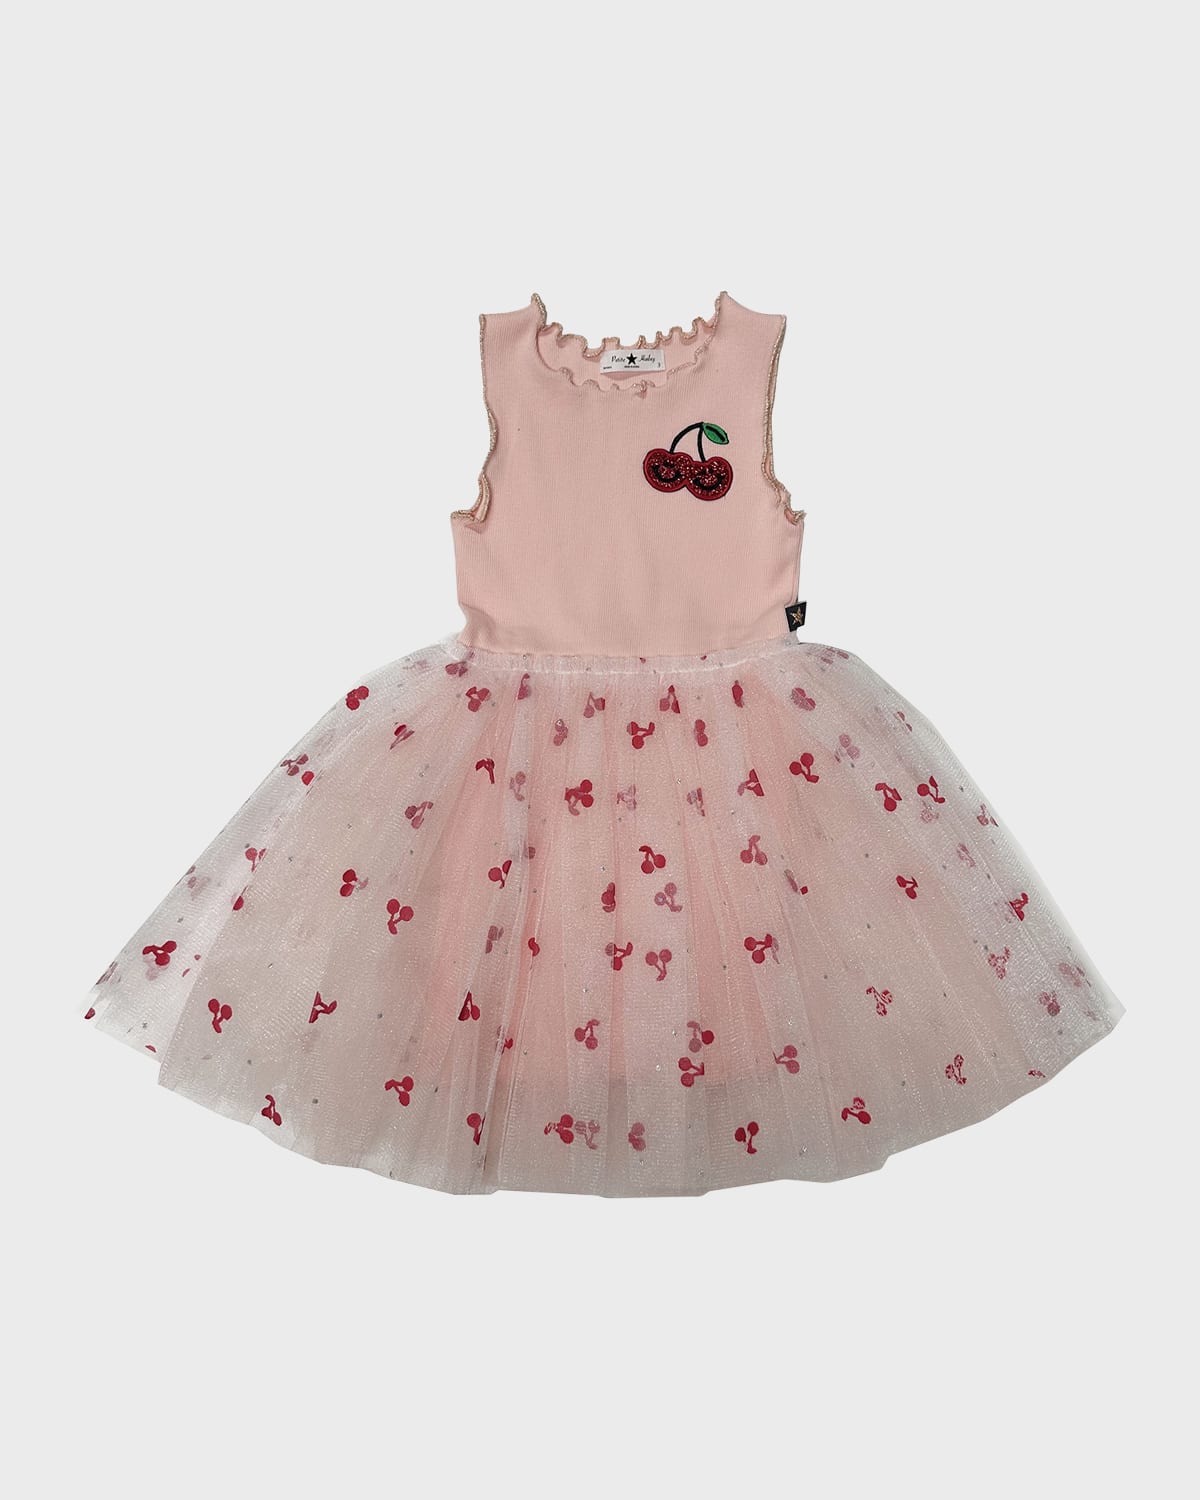 Petite Hailey Kids' Girl's Cherries Applique Printed Tulle Dress In Cherry Pink